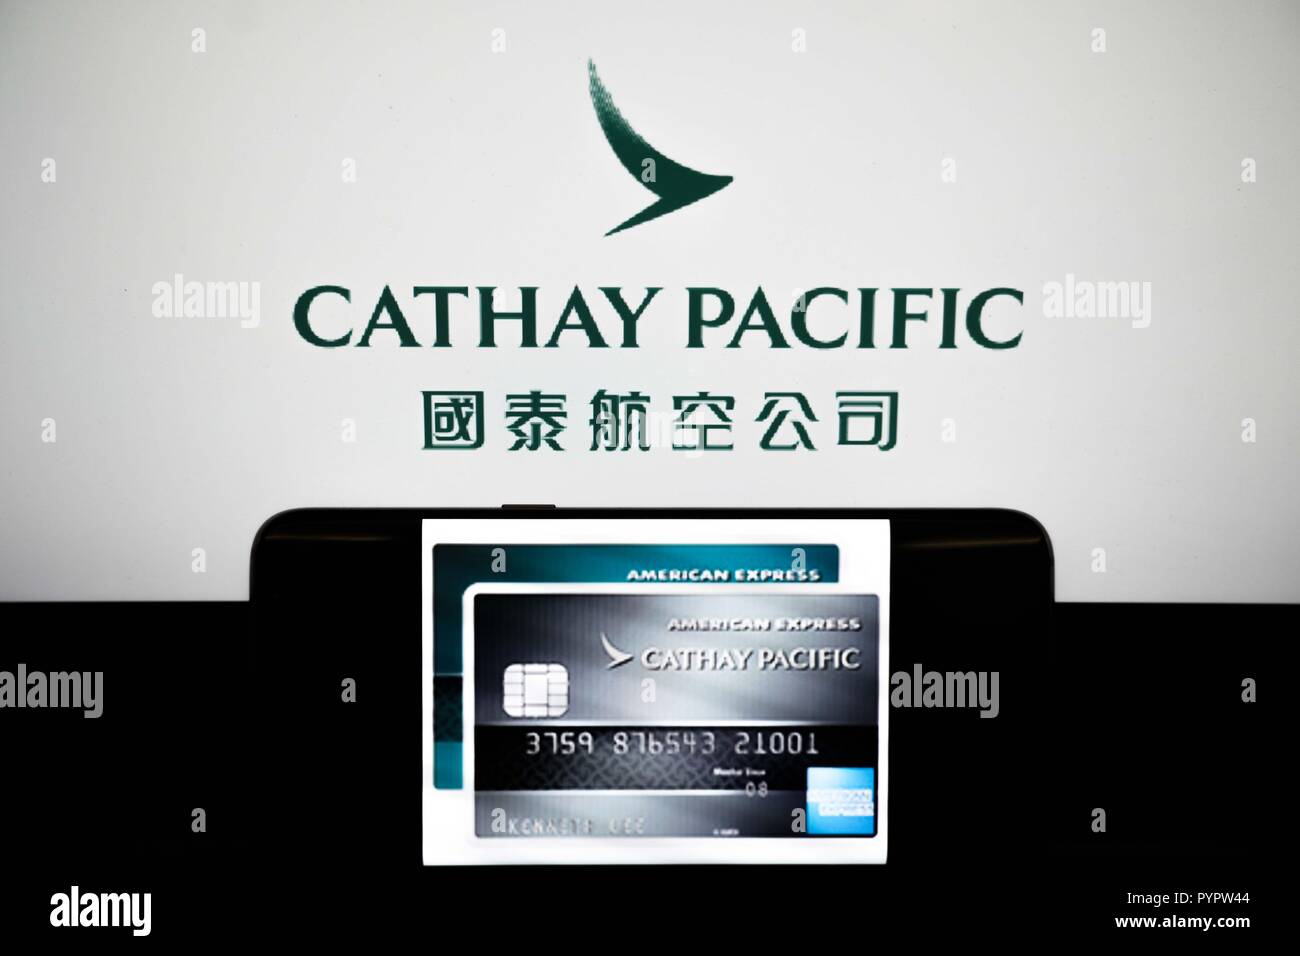 Cathay Pacific credit card displayed on a smartphone in front of a background of the Cathay Pacific logo. The Hong Kong based airline Cathay Pacific has reported that there has been a major data leak happened in march 2018 with data of around 9.4 million passengers was compromised during the breach, with 860,000 passport numbers, 245,000 Hong Kong identity card numbers, 403 expired credit card numbers and 27 credit card numbers without CVV being accessed. Stock Photo